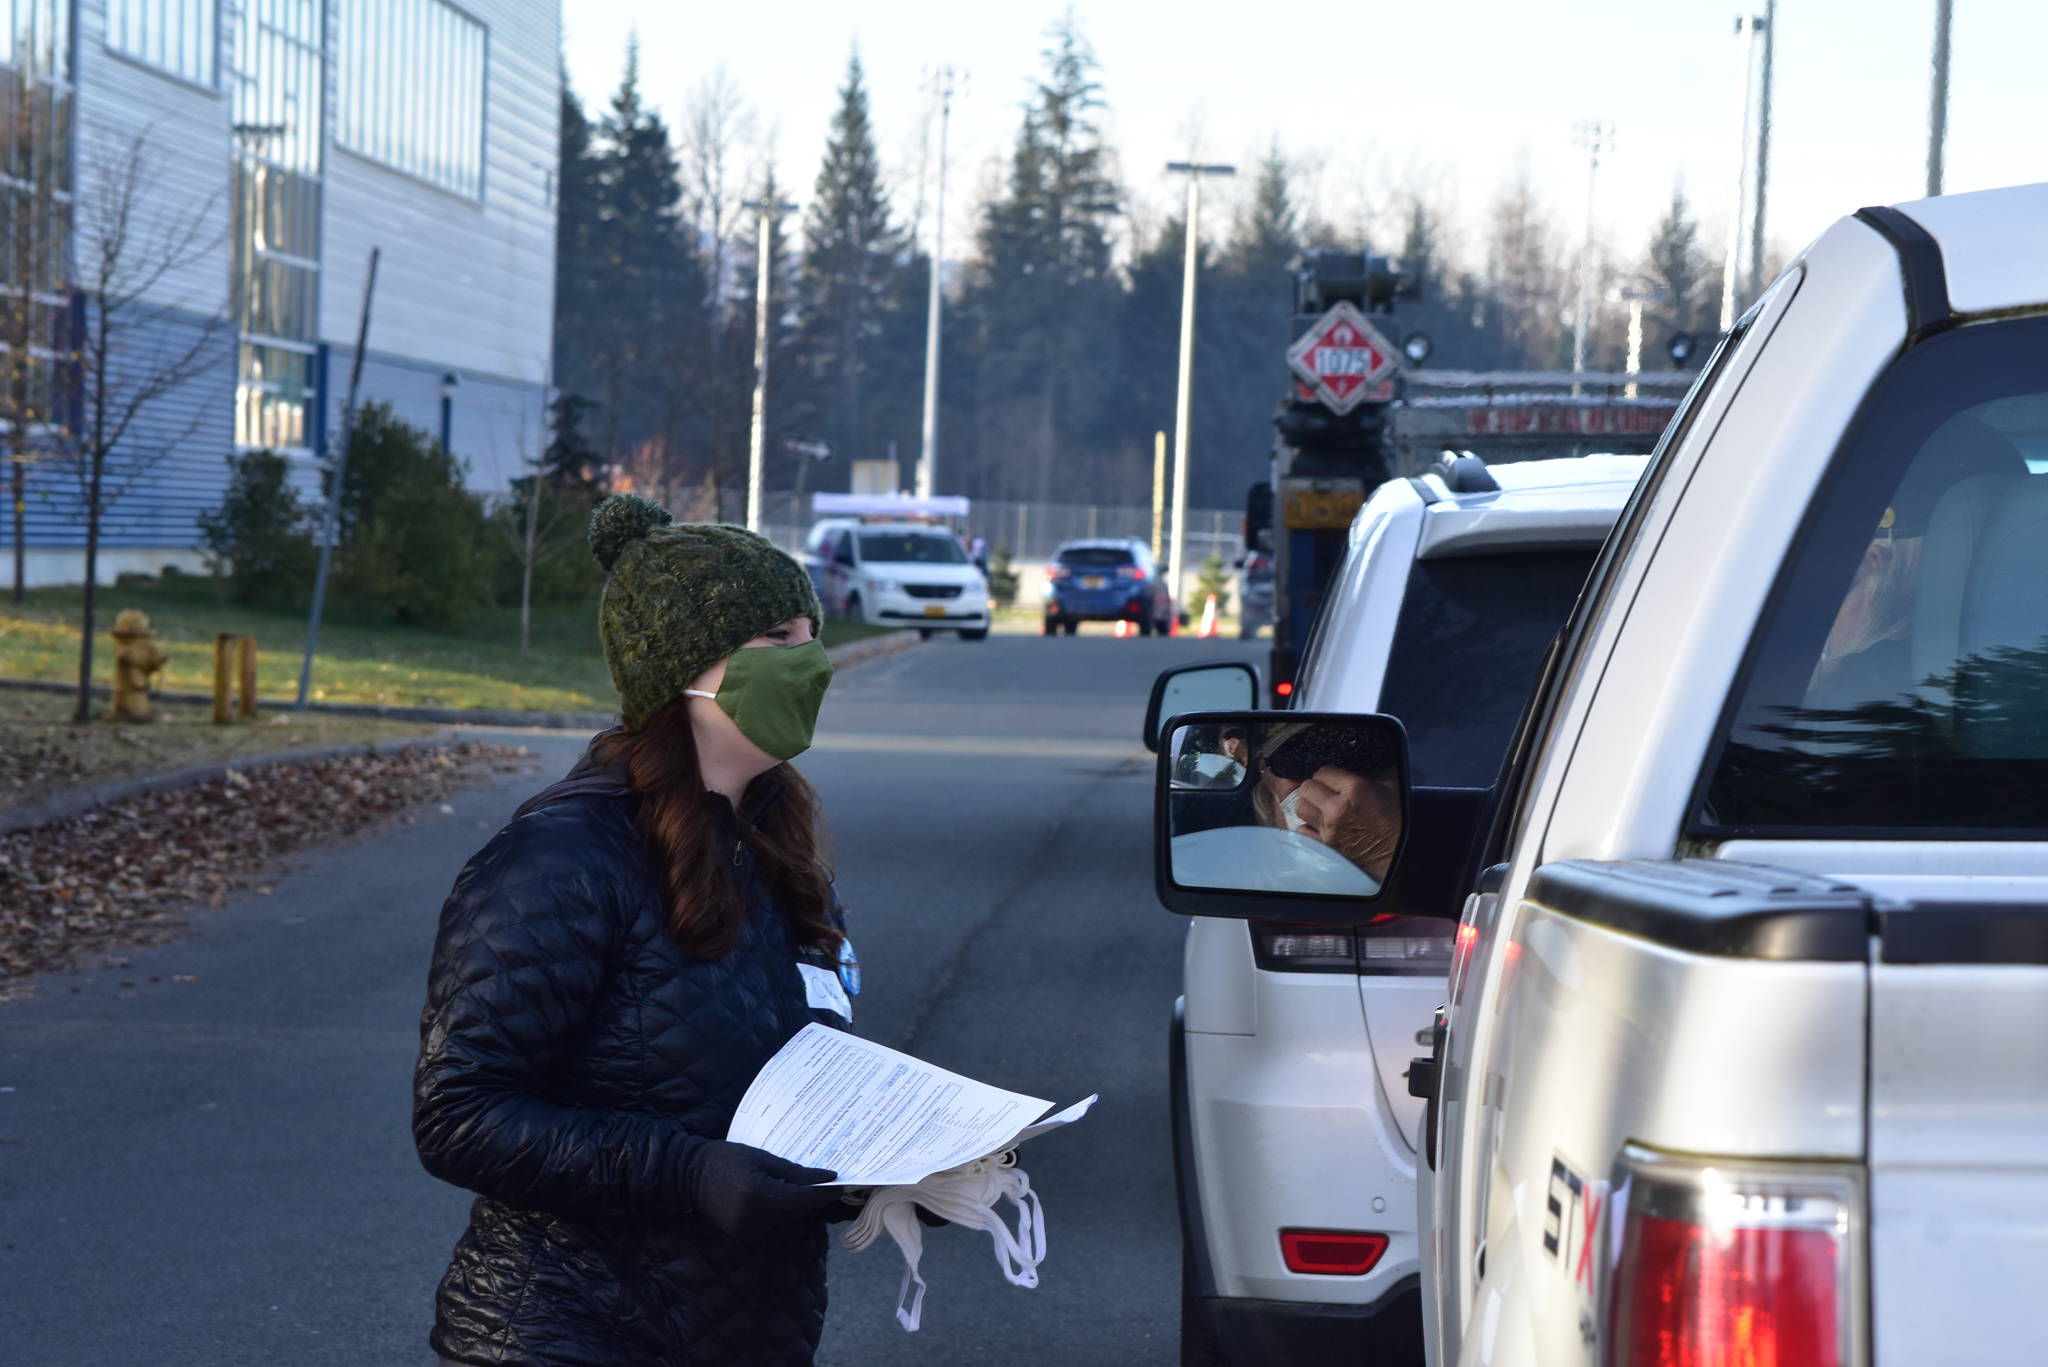 Cindy Carte, a volunteer worker from Bartlett Regional Hospital, hands out paperwork to Juneau residents waiting in line for a drive-thru flu shot clinic at Thunder Mountain High School on Saturday, Oct. 24, 2020. State and city health officials said the October vaccine clinic doubled as a practice run for an eventual coronavirus vaccine distribution. (Peter Segall / Juneau Empire)